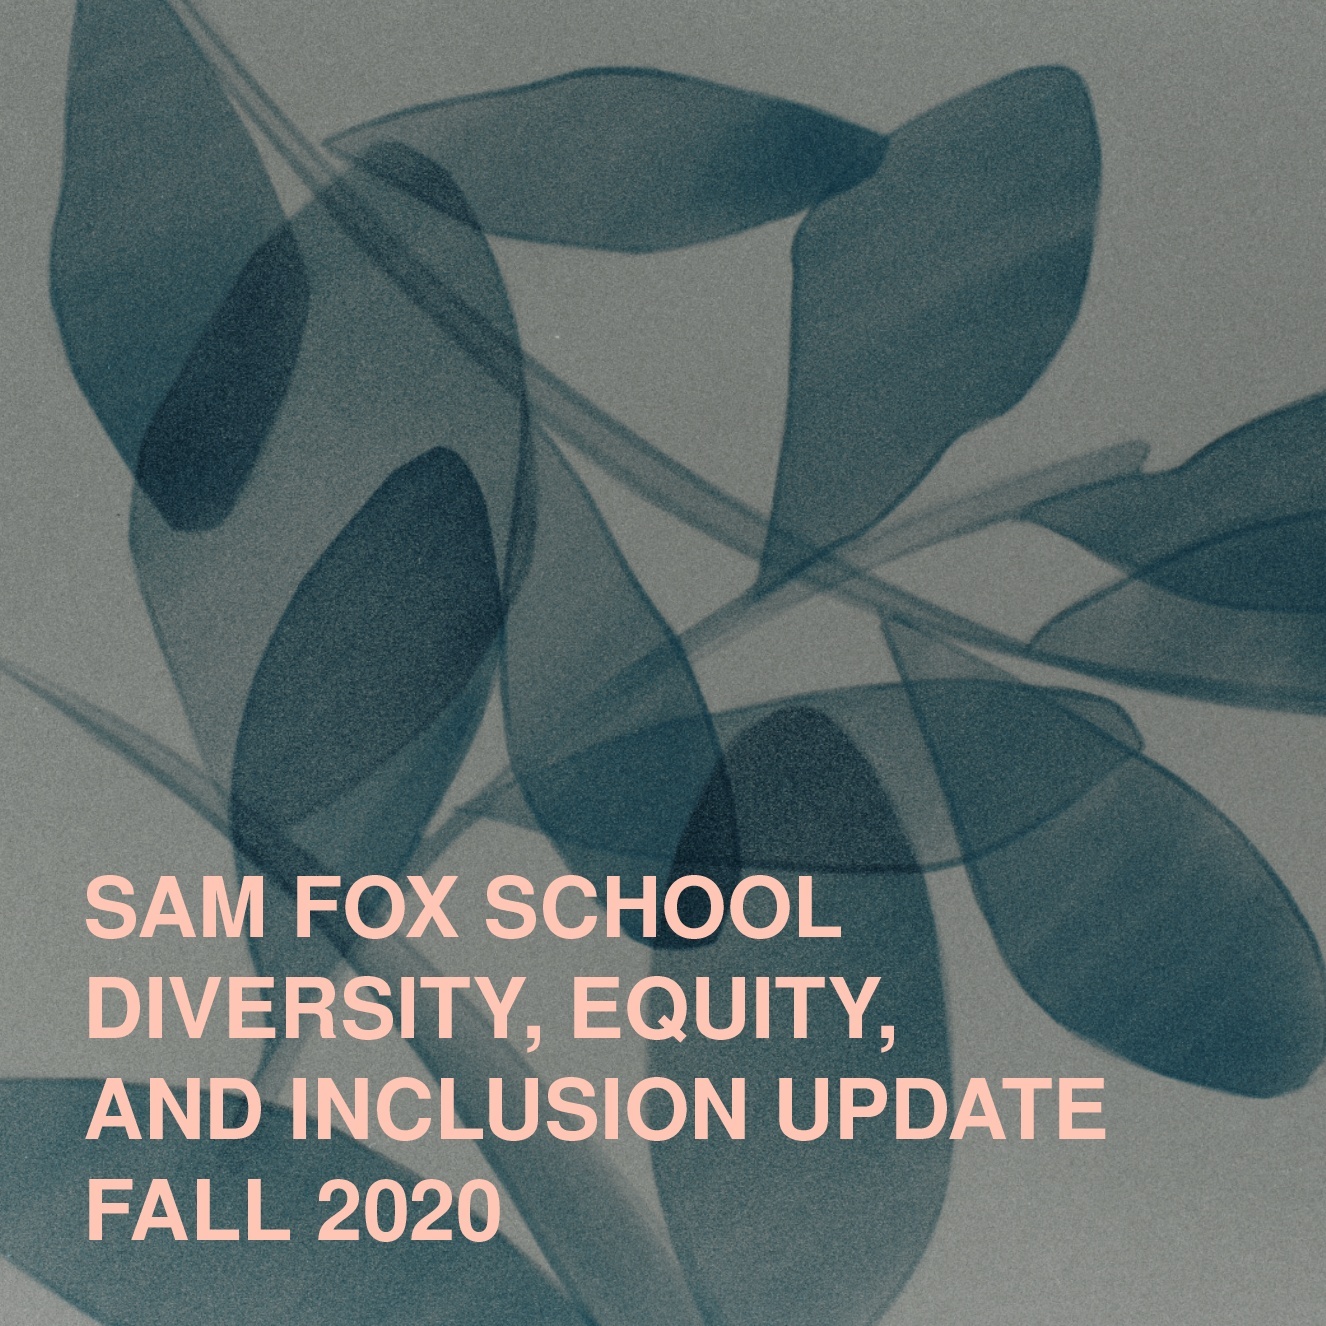 Blue abstract leaves on a tan background with the words "Sam Fox School Diversity, Equity, and Inclusion Update"